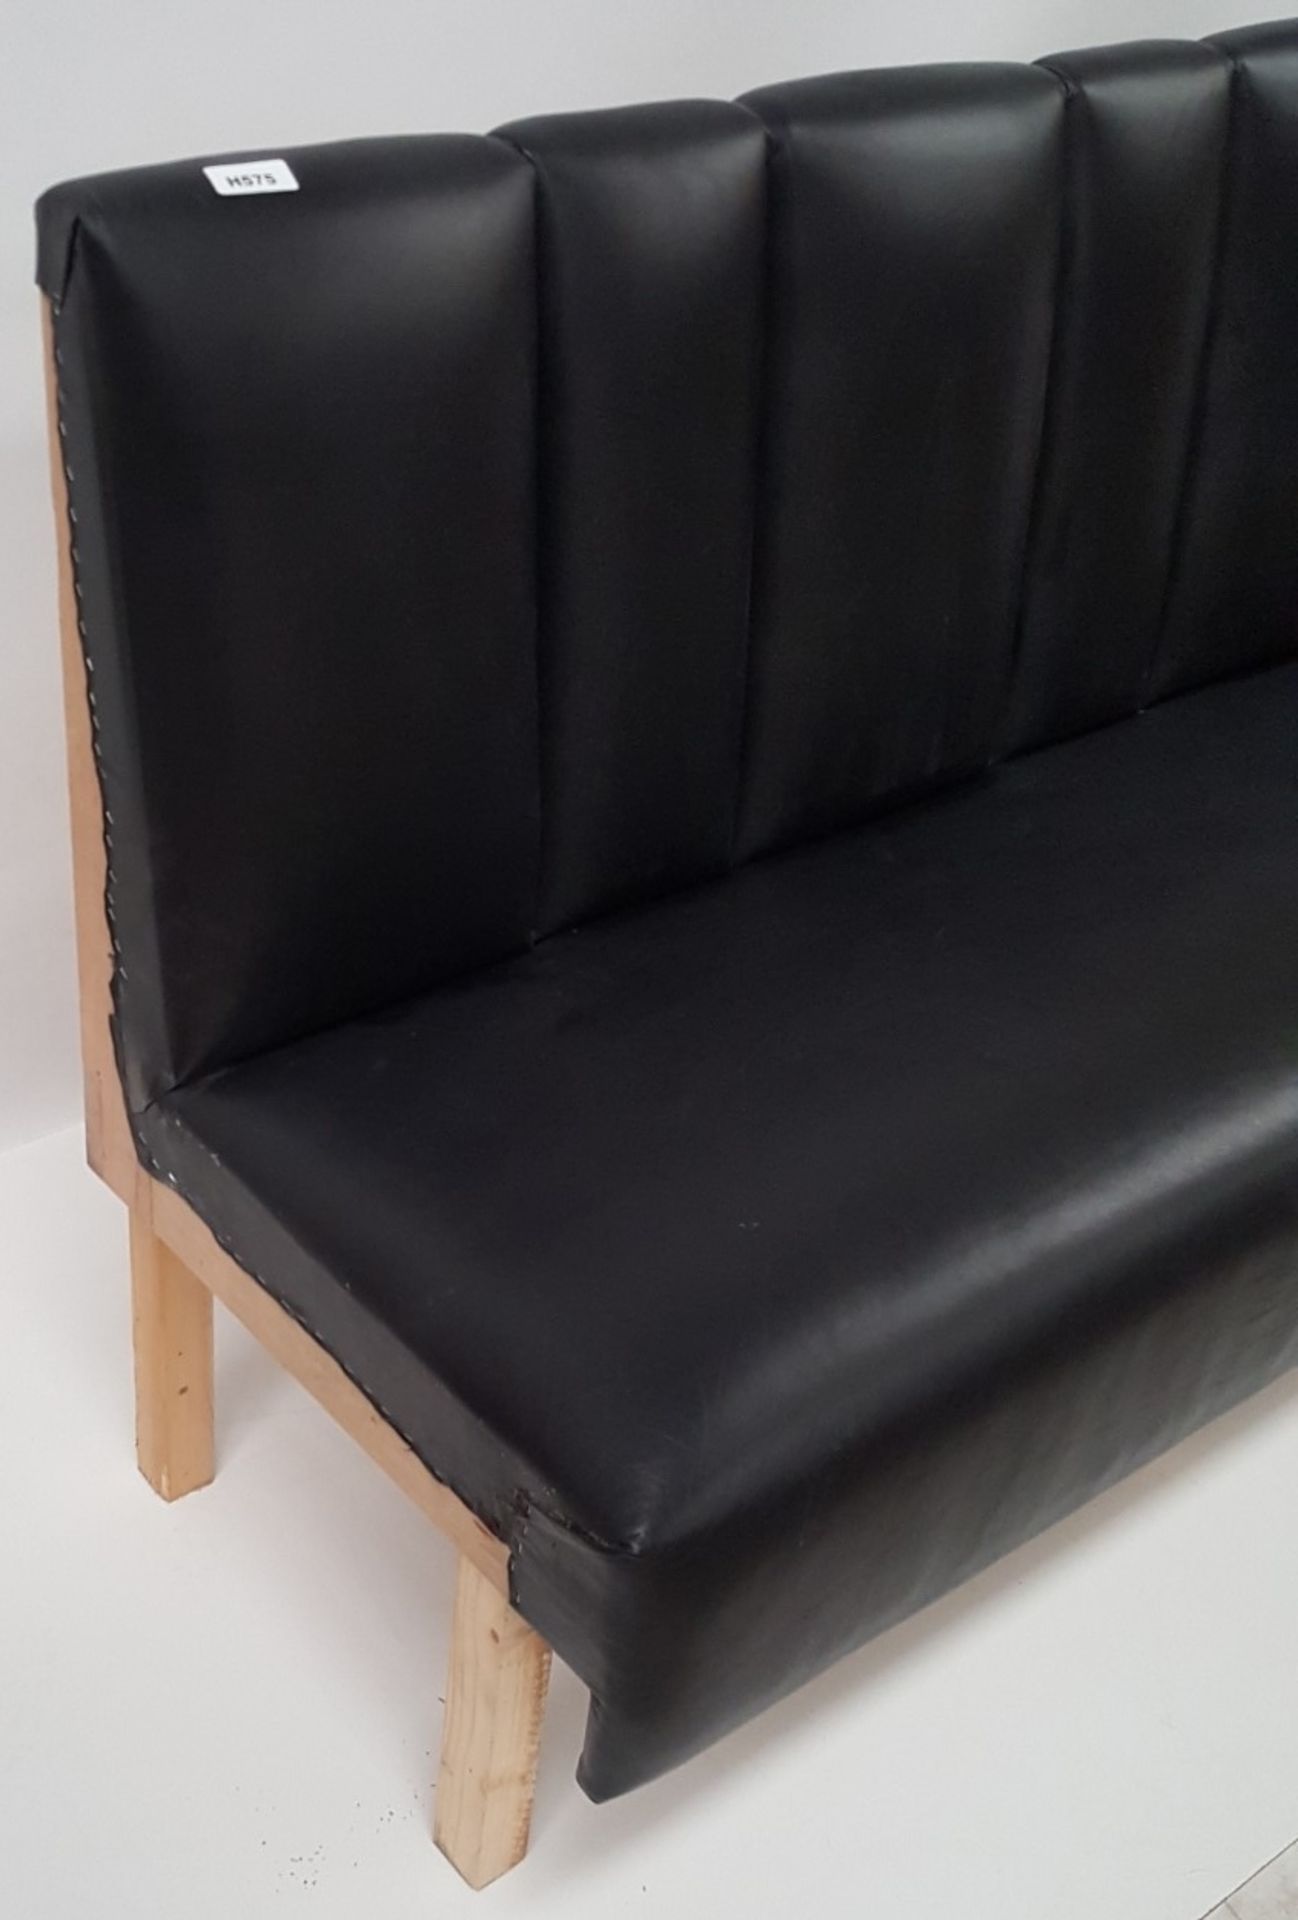 3 Pieces Of Black Upholstered Faux Leather Seating Booths - CL431 - Location: Altrincham WA14 - Image 11 of 19